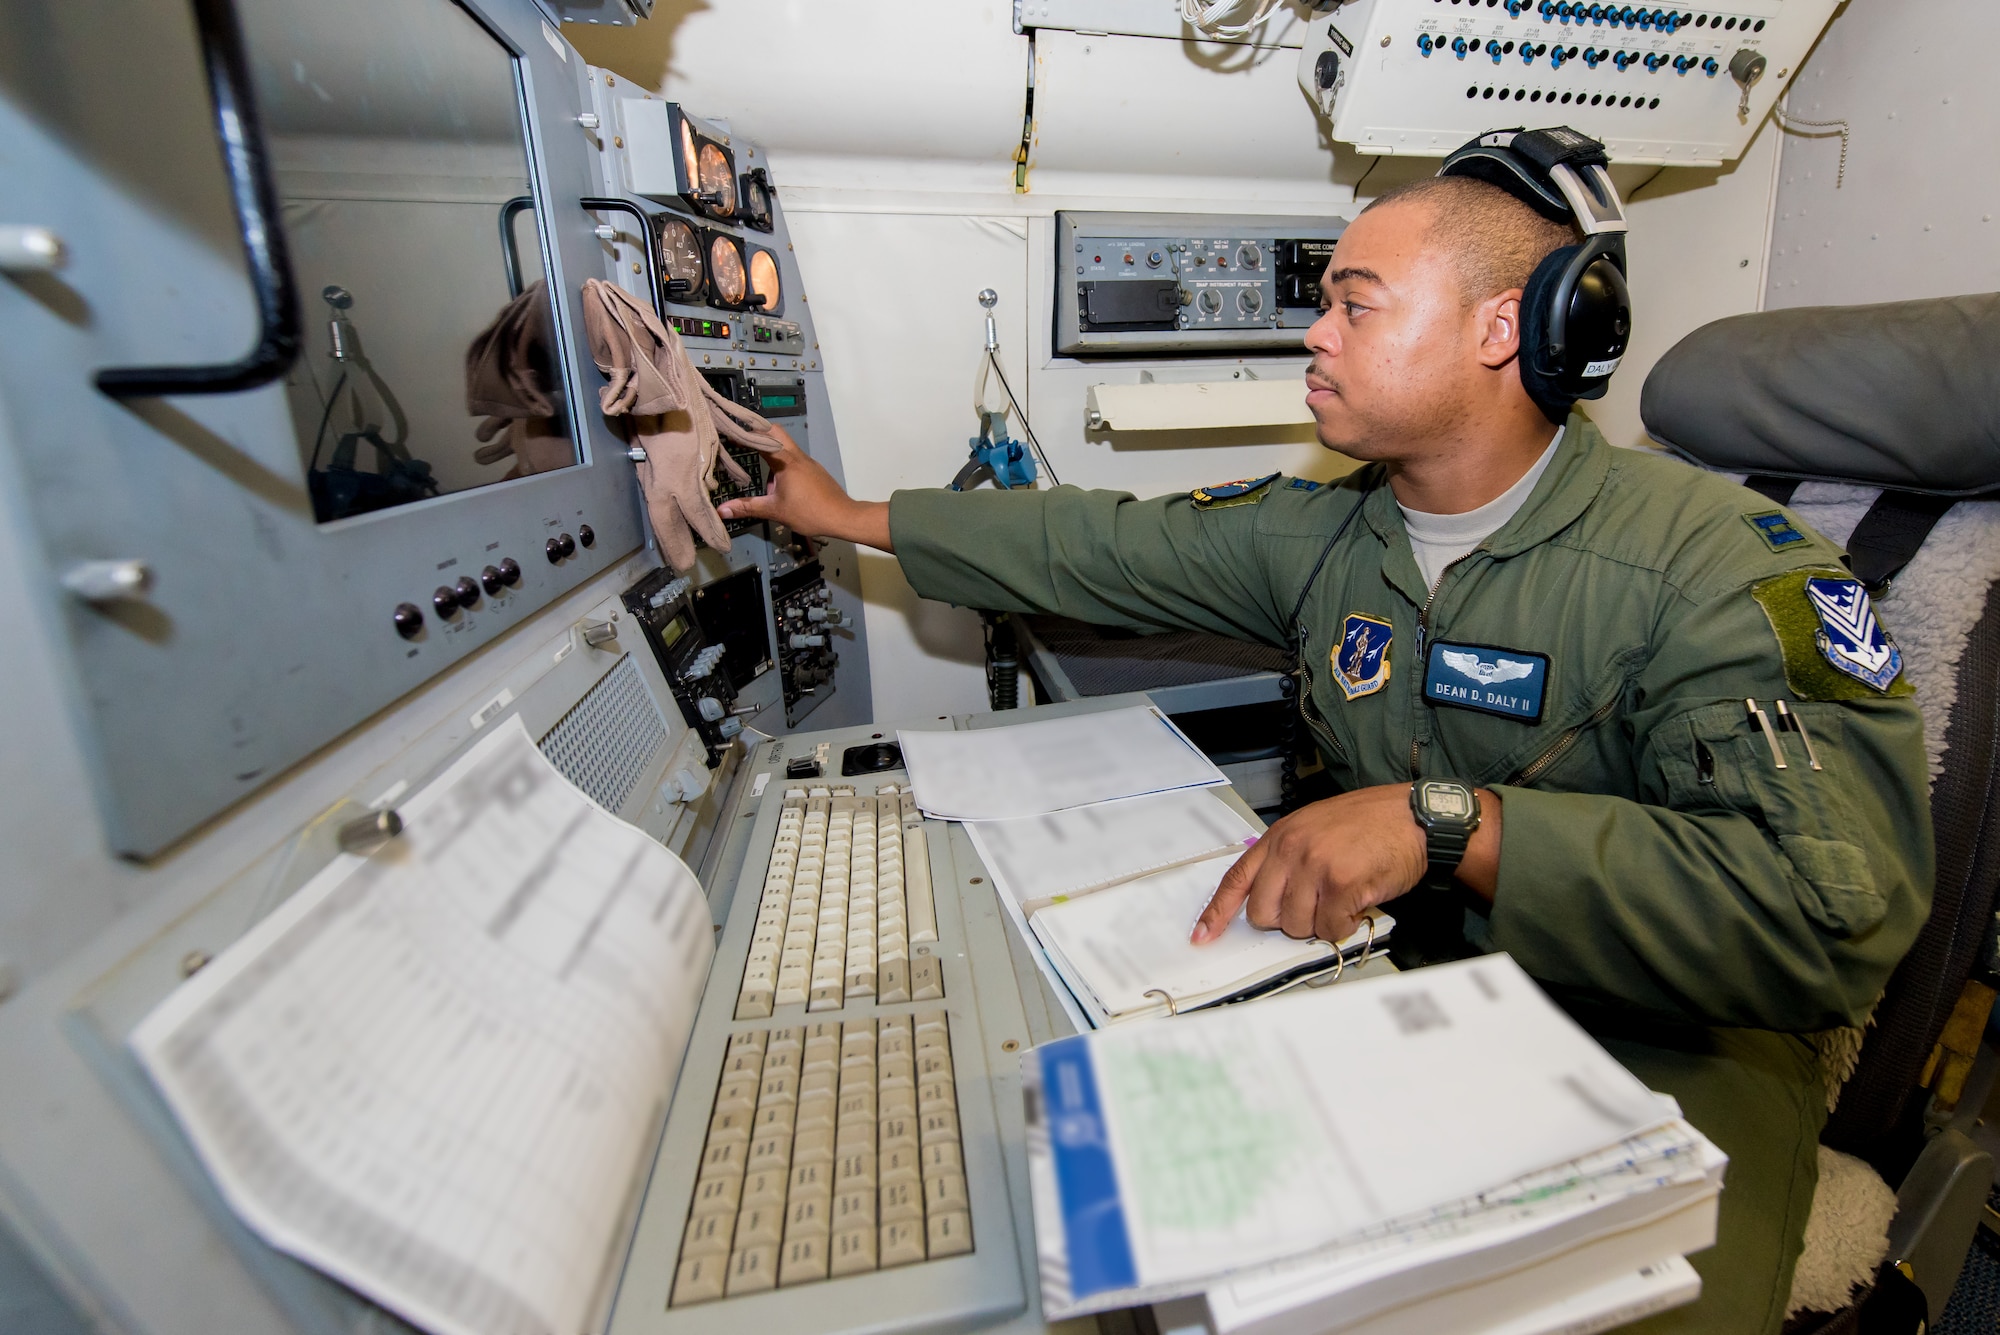 U.S. Air Force Capt. Dean Daly II, navigator with the 116th Air Control Wing (ACW), Georgia Air National Guard, inputs coordinates and performs a systems check aboard an E-8C Joint STARS prior to a mission in the Boars Nest 2015 exercise, Robins Air Force Base, Ga., Aug. 20, 2015. The 116th ACW hosted the eighth annual Boars Nest Large Force Exercise bringing together more than 20 joint-force units and 55 different aircraft for aircrew training in a realistic land and maritime threat environment. Crews flying the E-8C Joint STARS manned platform, used their unique battle management, command and control, intelligence, surveillance and reconnaissance capabilities, integrated with other Air National Guard, Air Force, Navy, and Marine aircraft, to complete maritime and land-based missions during the exercise. (U.S. Air National Guard photo by Senior Master Sgt. Roger Parsons/Released) (Portions of photo blurred for security purposes)